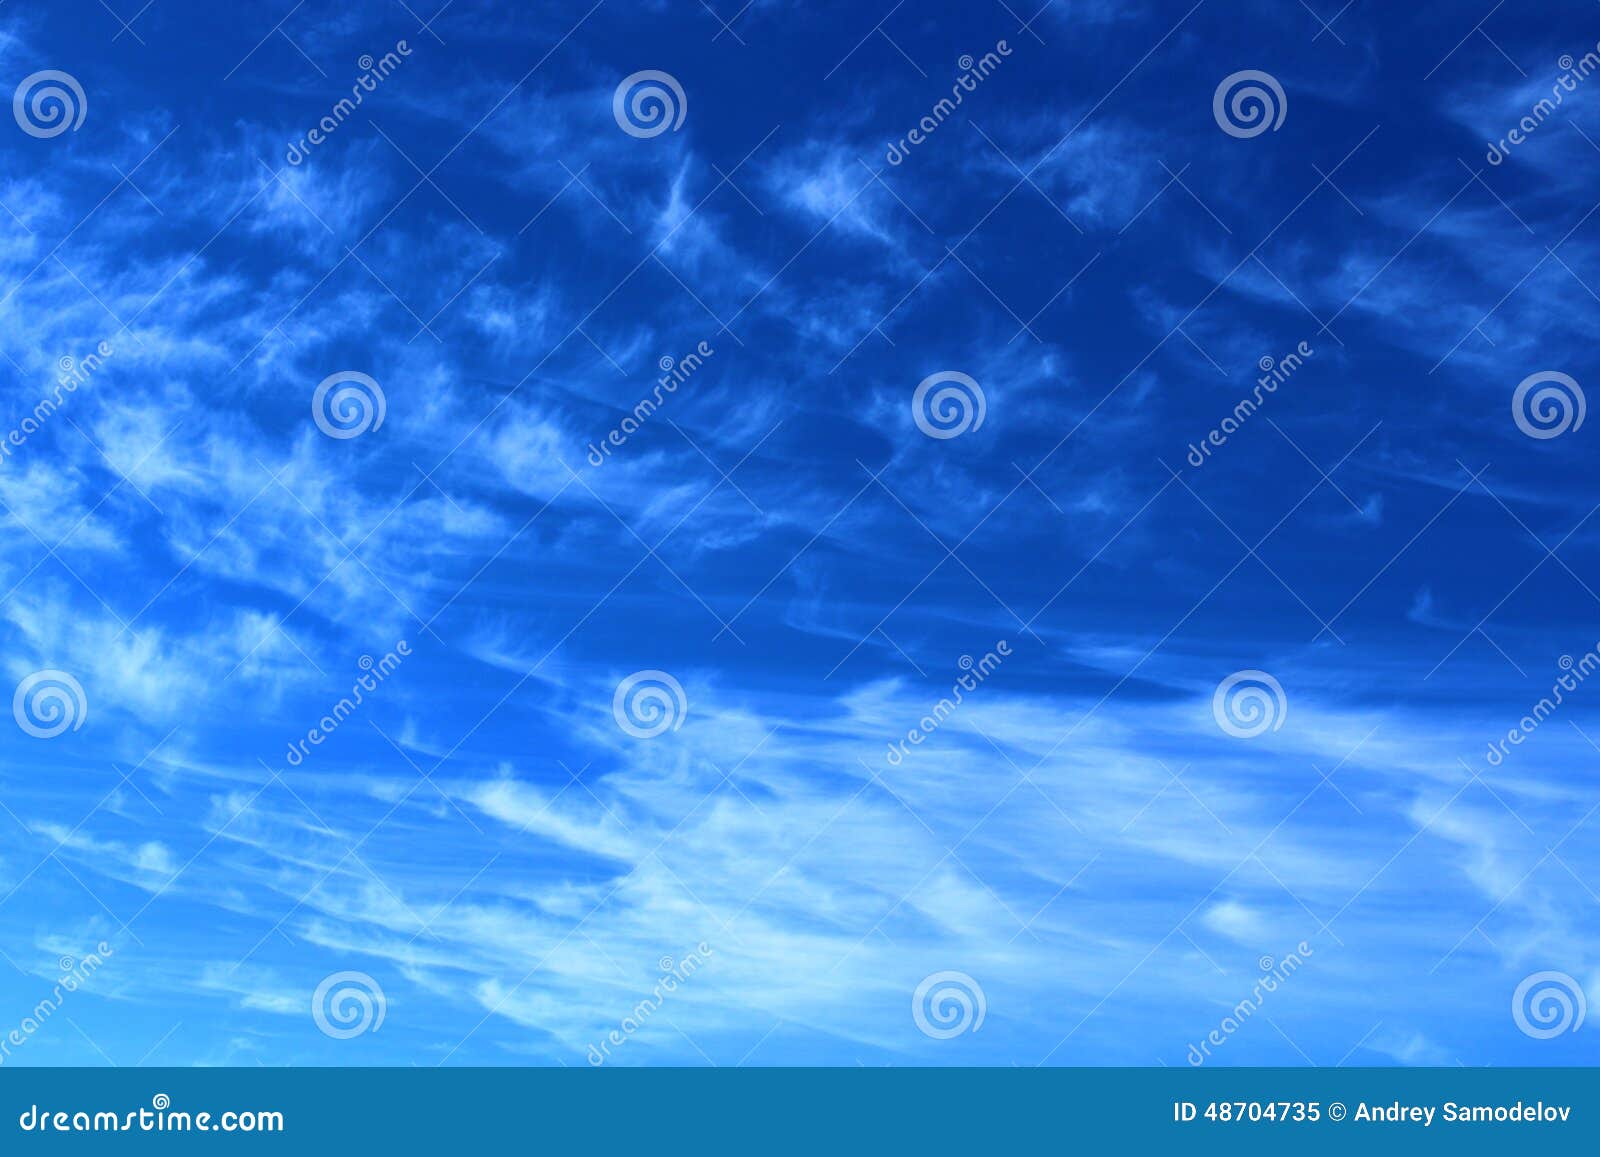 clouds texture